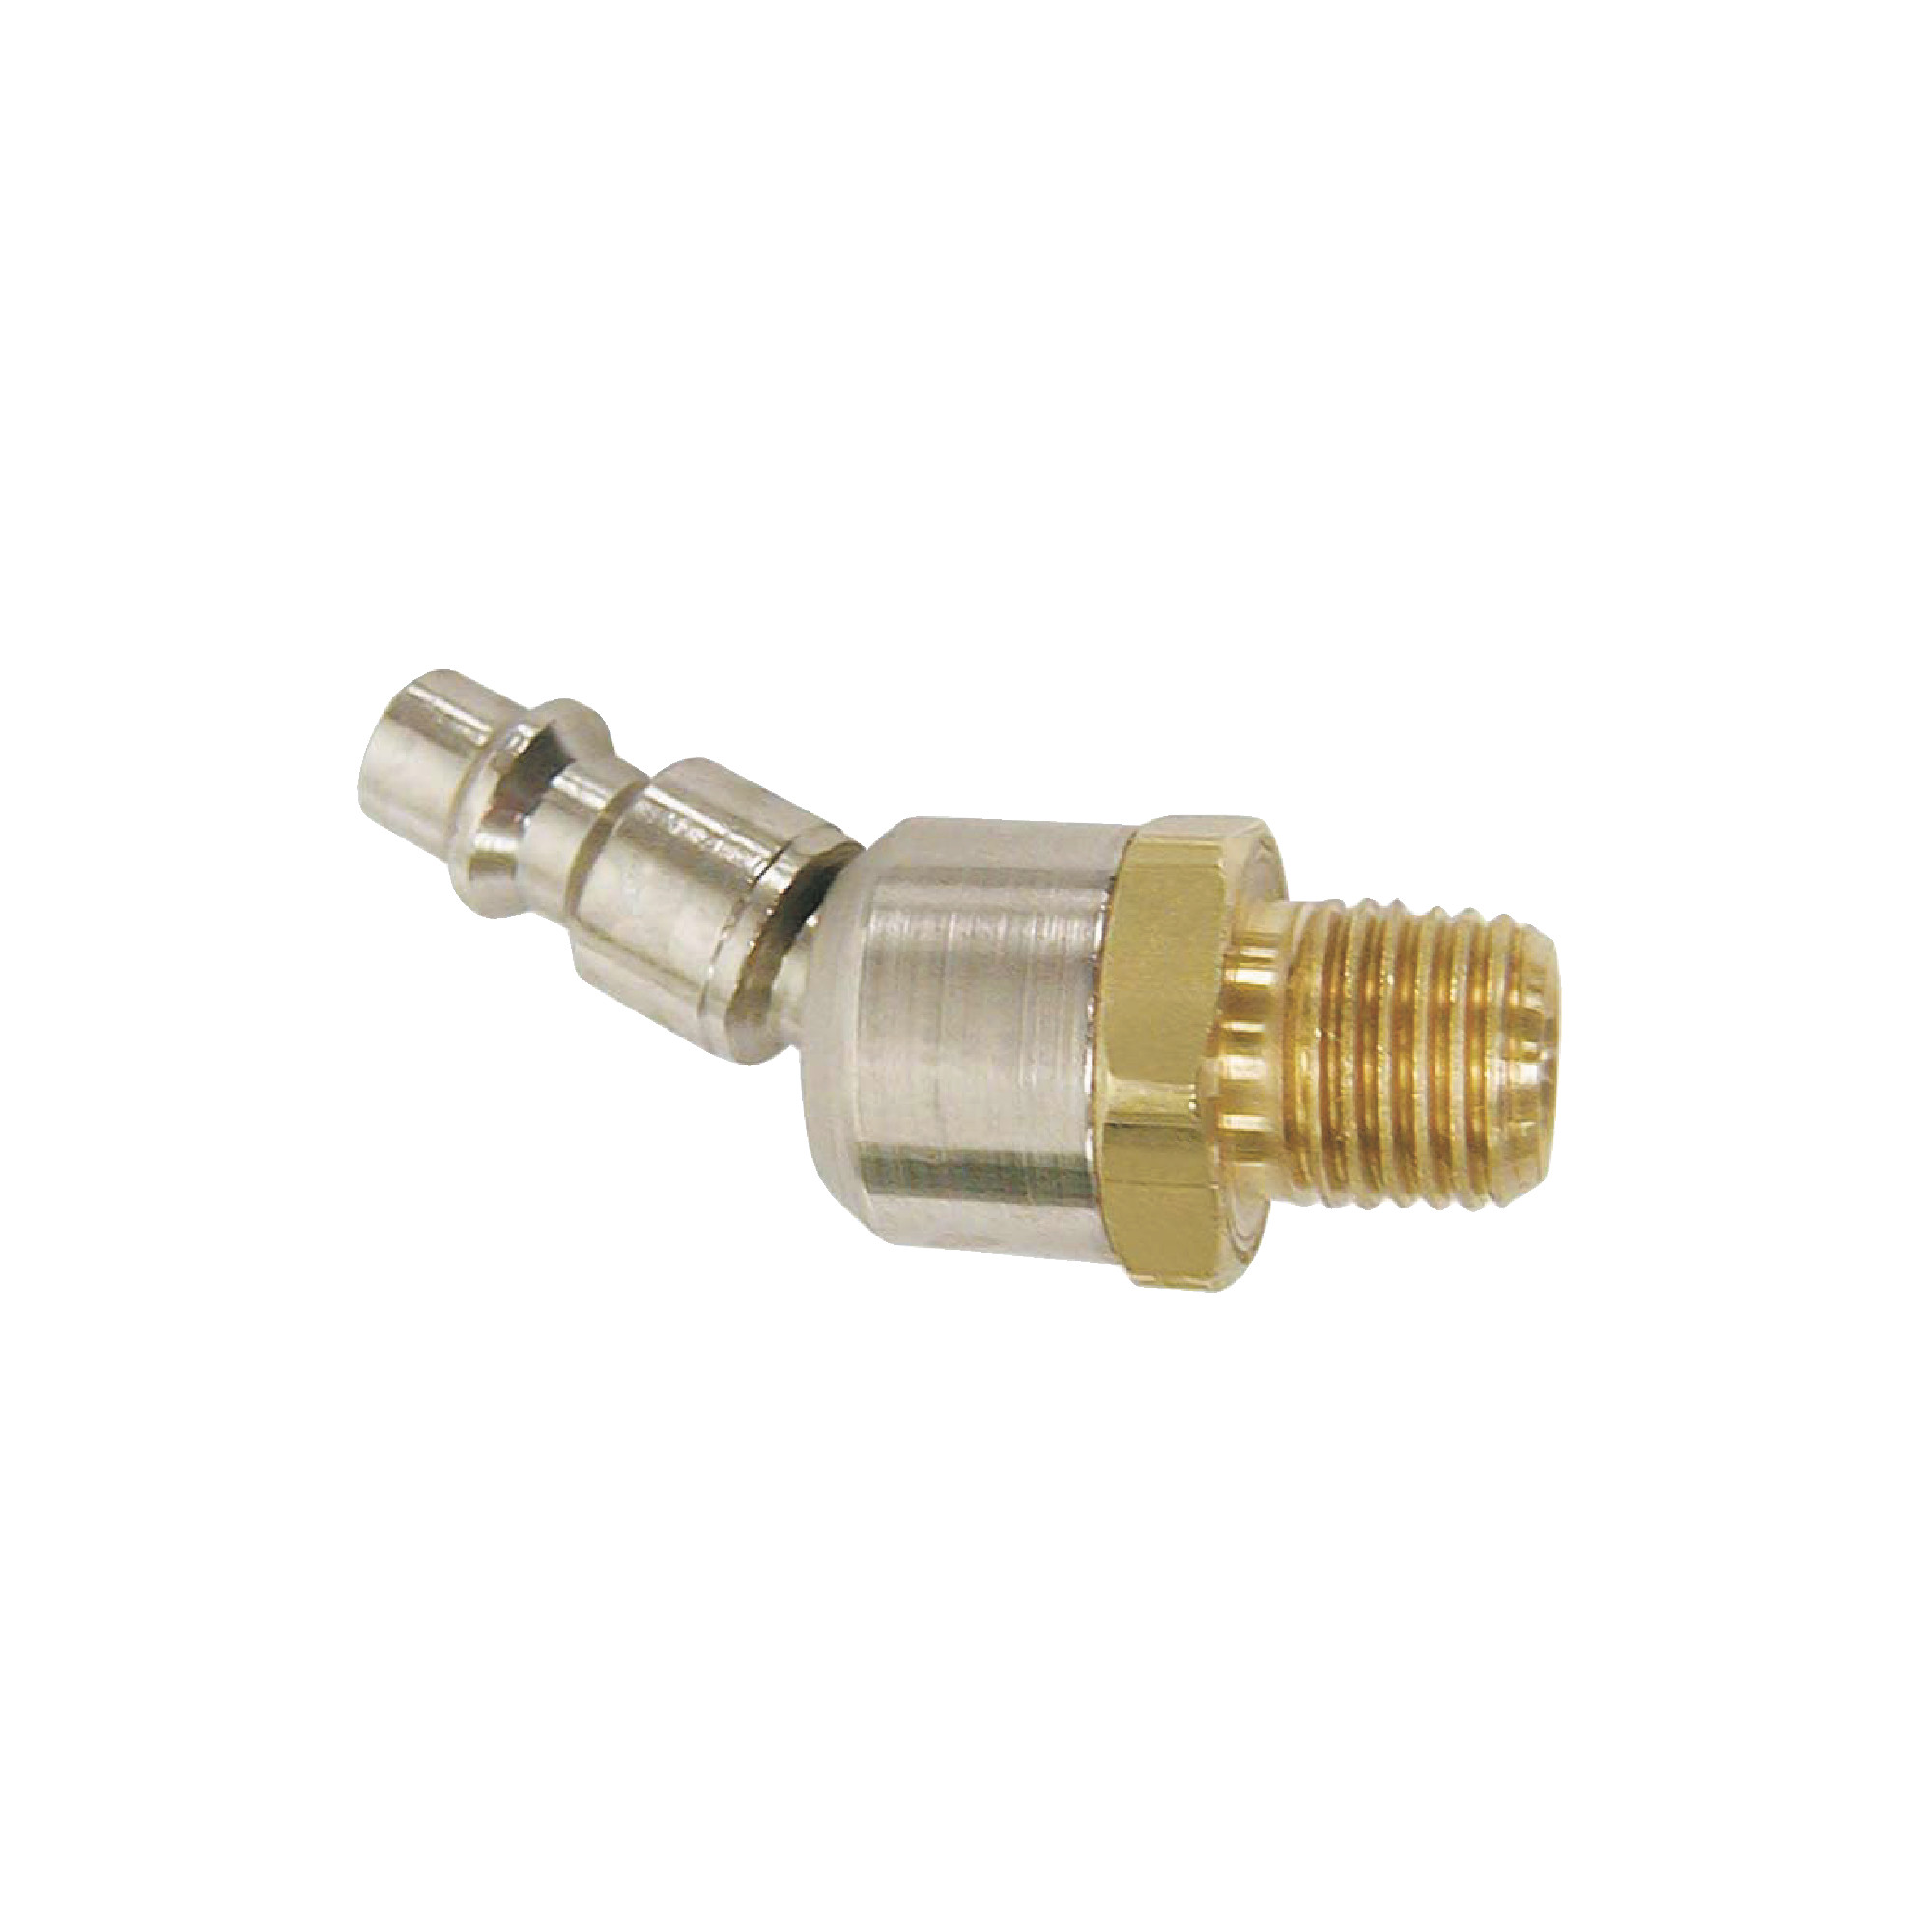 1/4" Industrial Ball Swivel Connector, 3/8" MPT